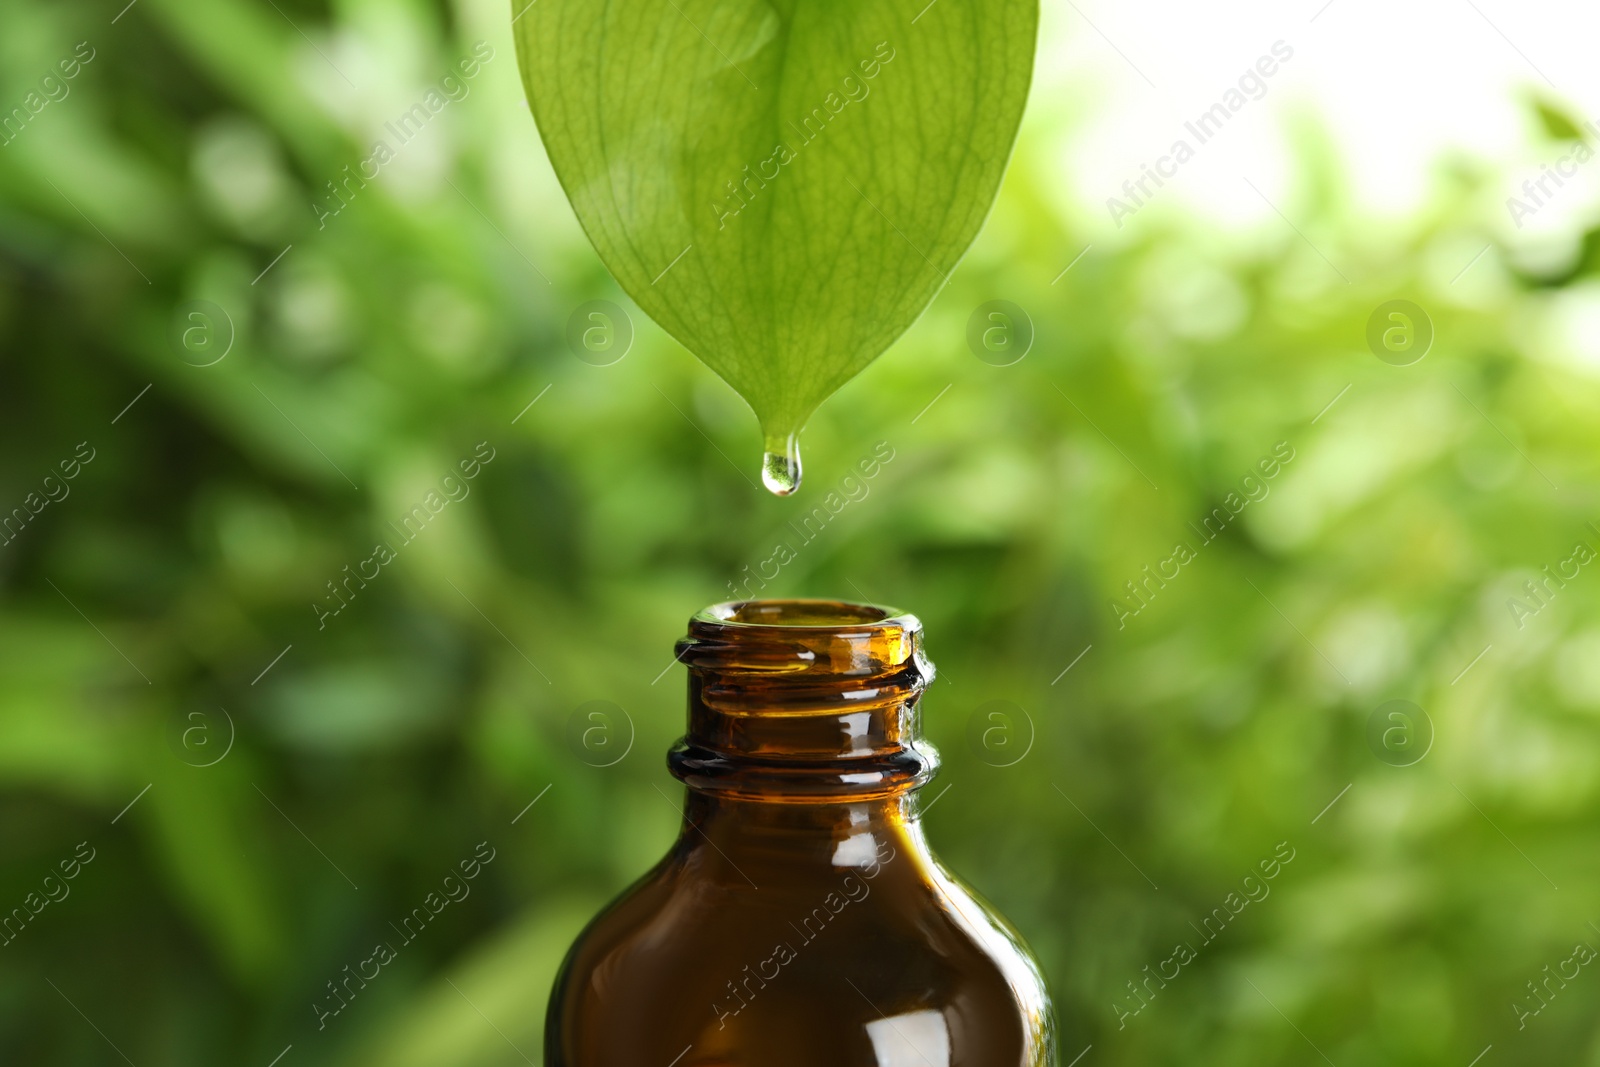 Photo of Essential oil dripping from leaf into glass bottle on blurred background